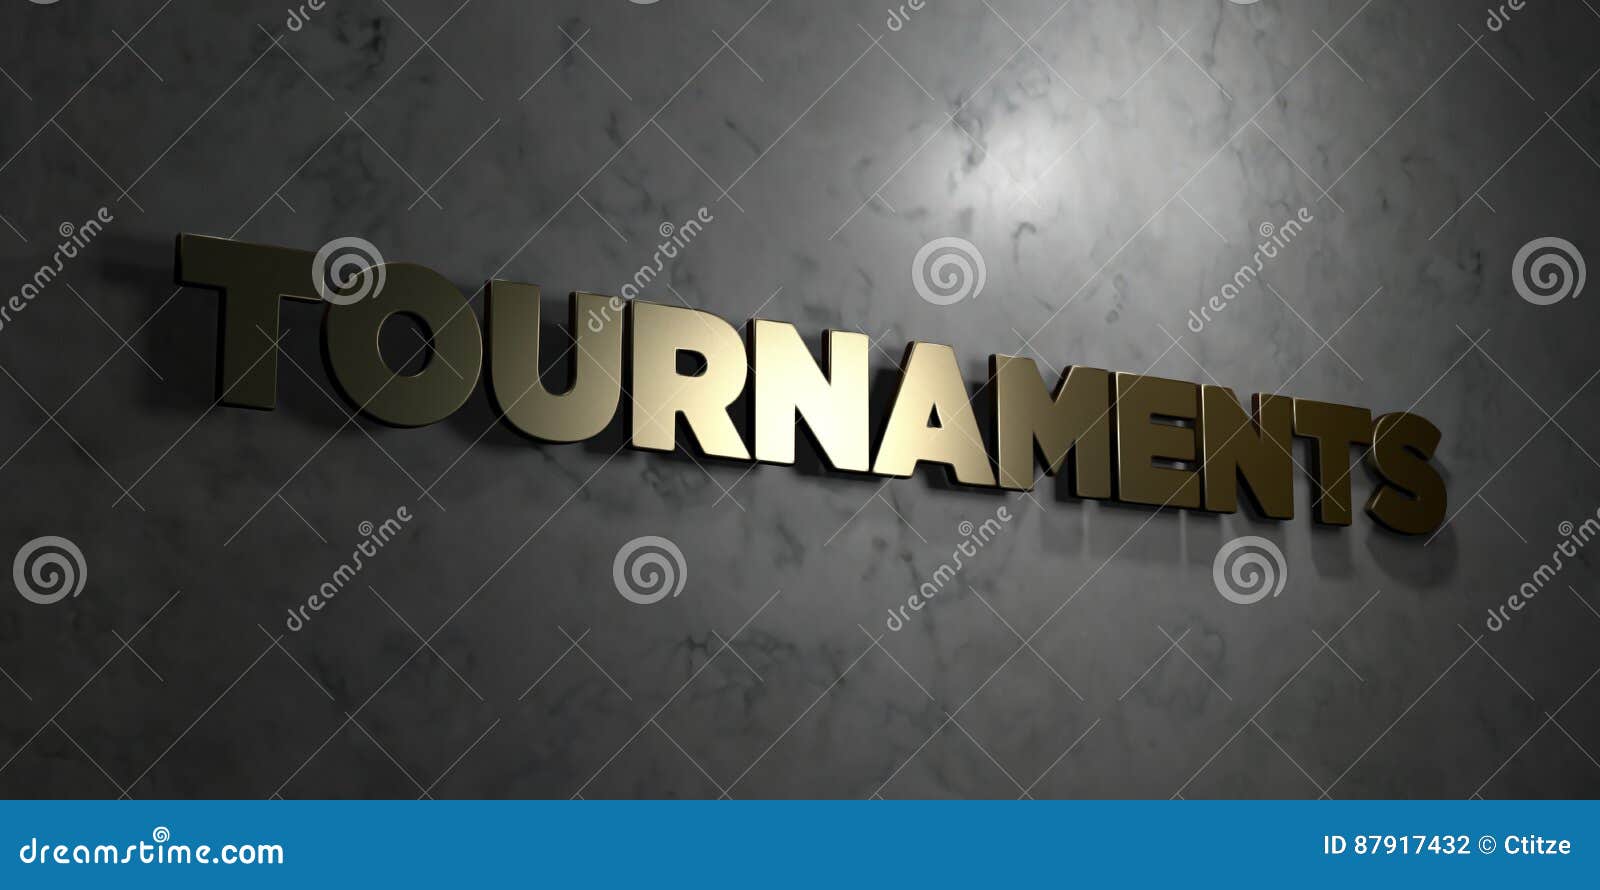 tournaments - gold text on black background - 3d rendered royalty free stock picture